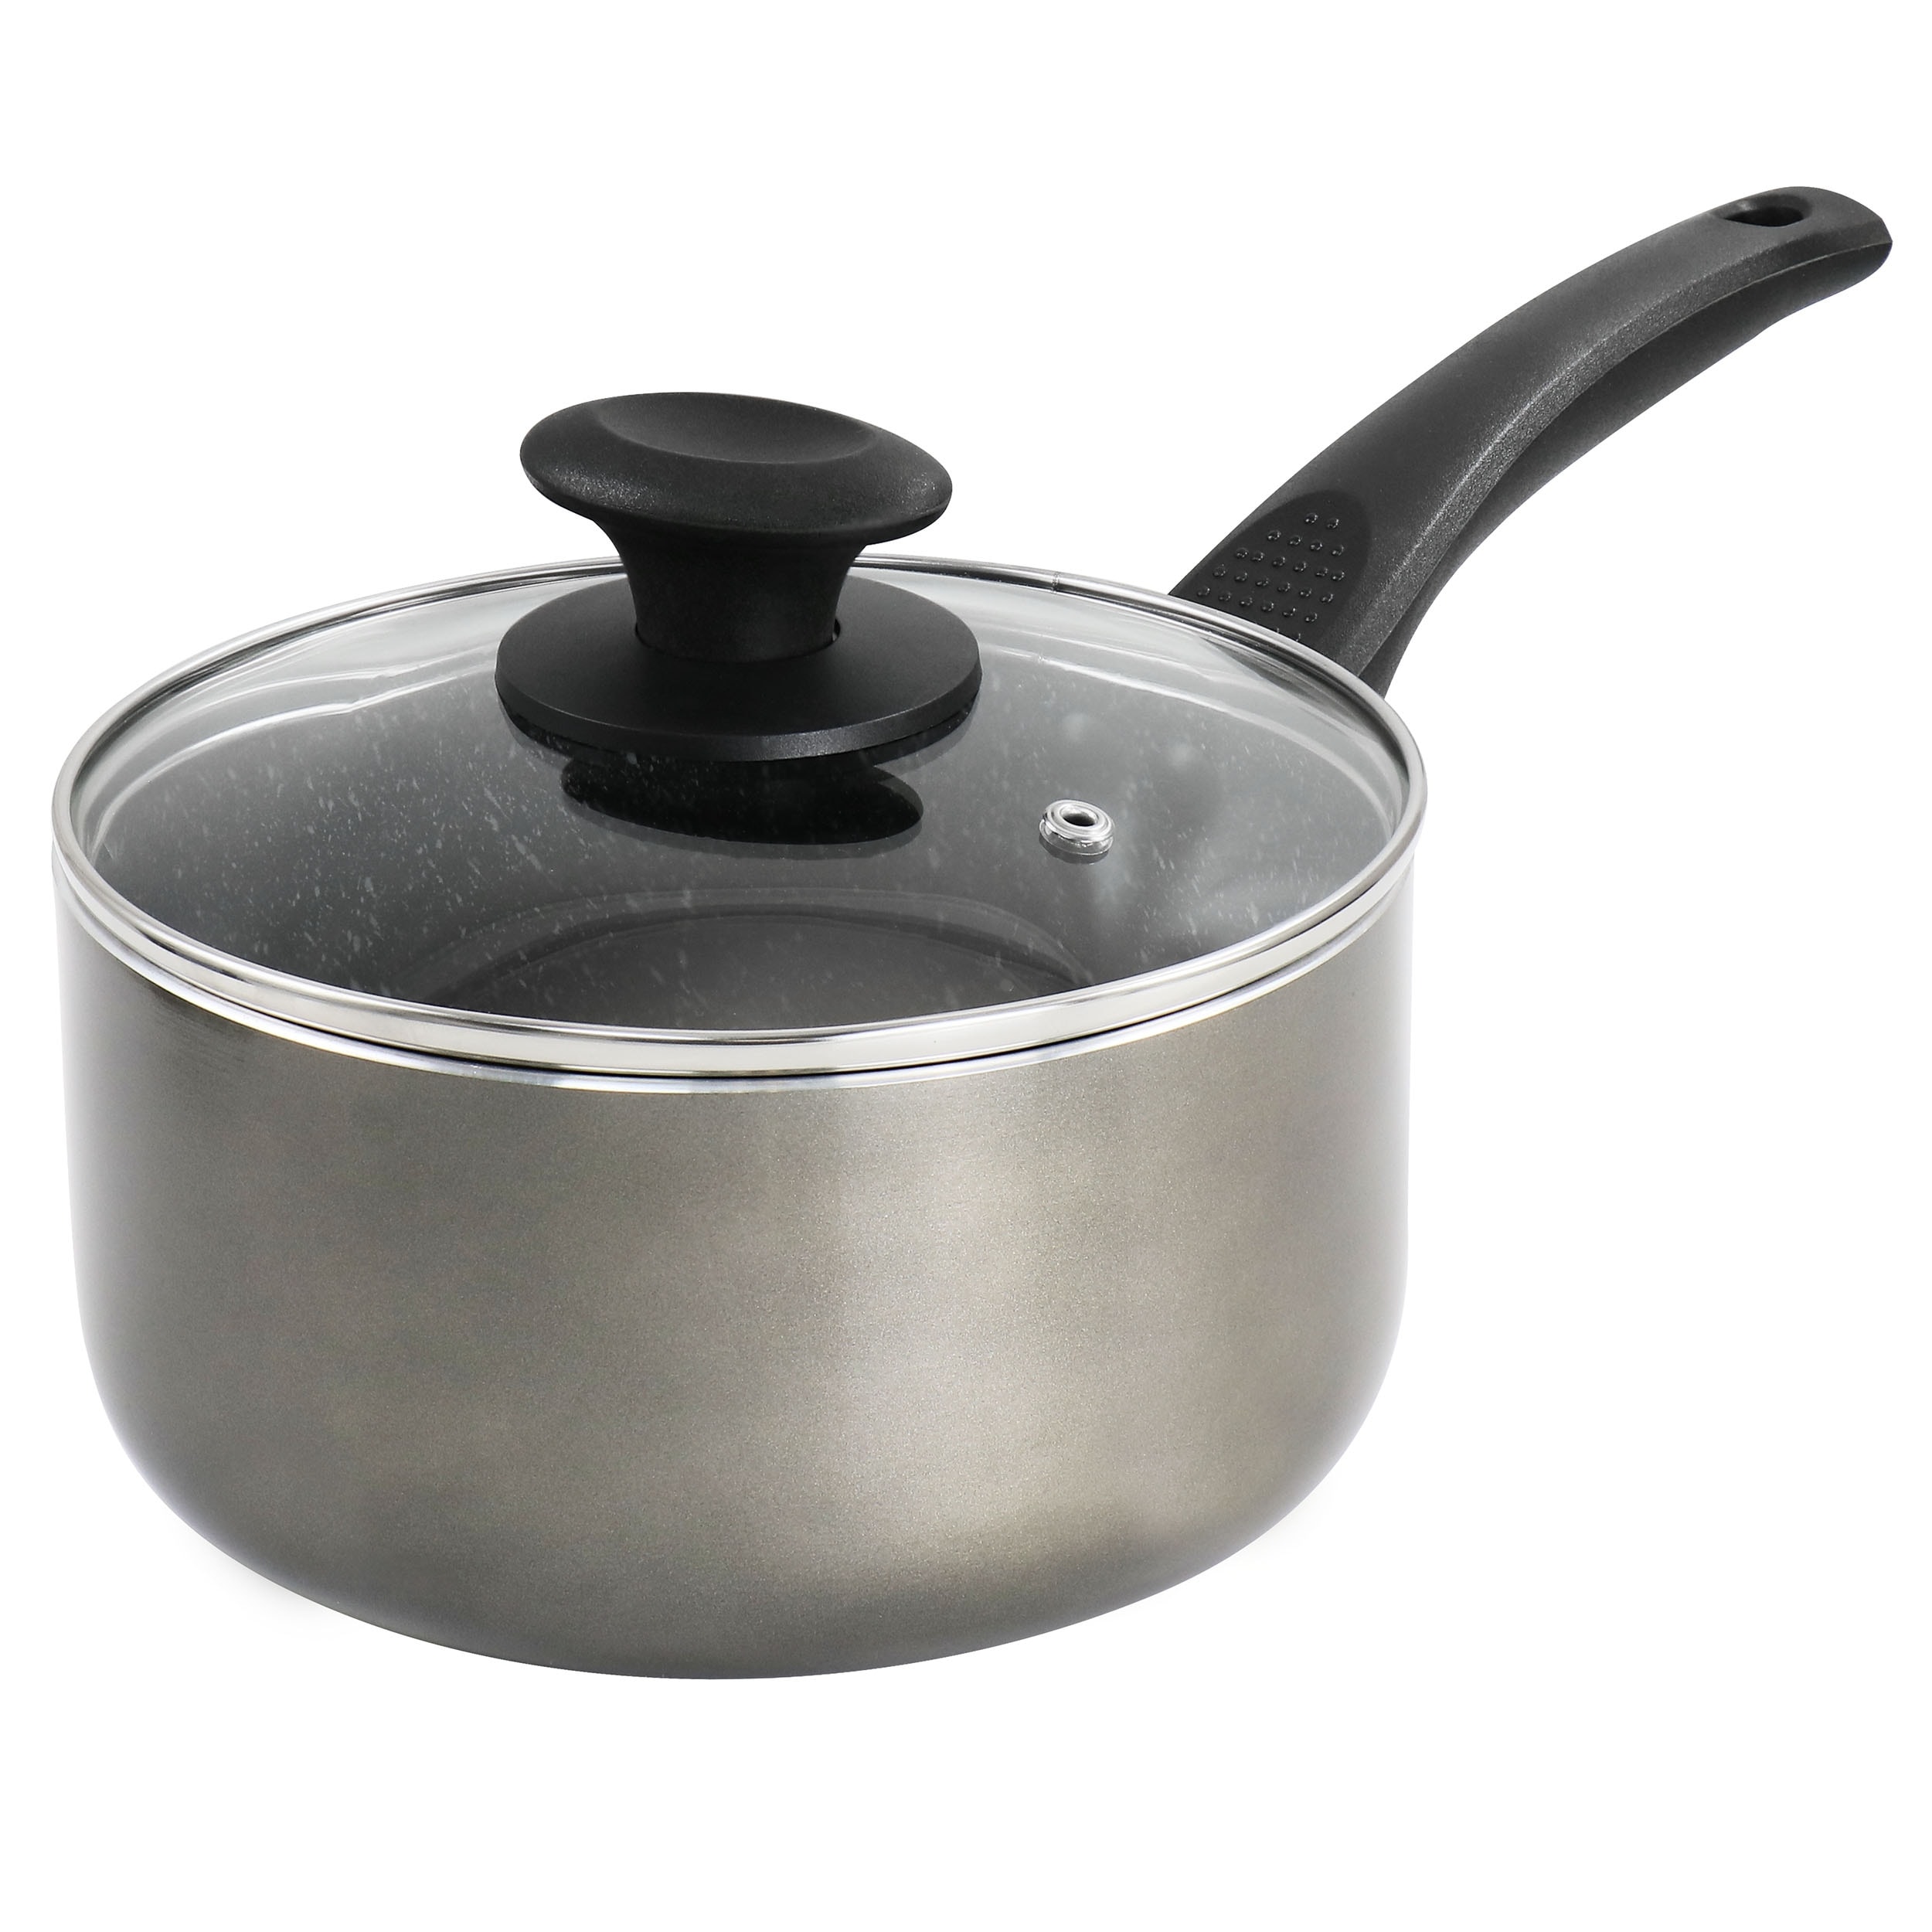 https://ak1.ostkcdn.com/images/products/is/images/direct/33a48bd1658b237416c4aa773648621ce74cbbff/2.5-Quart-Nonstick-Aluminum-Saucepan-with-Lid-in-Metallic-Grey.jpg